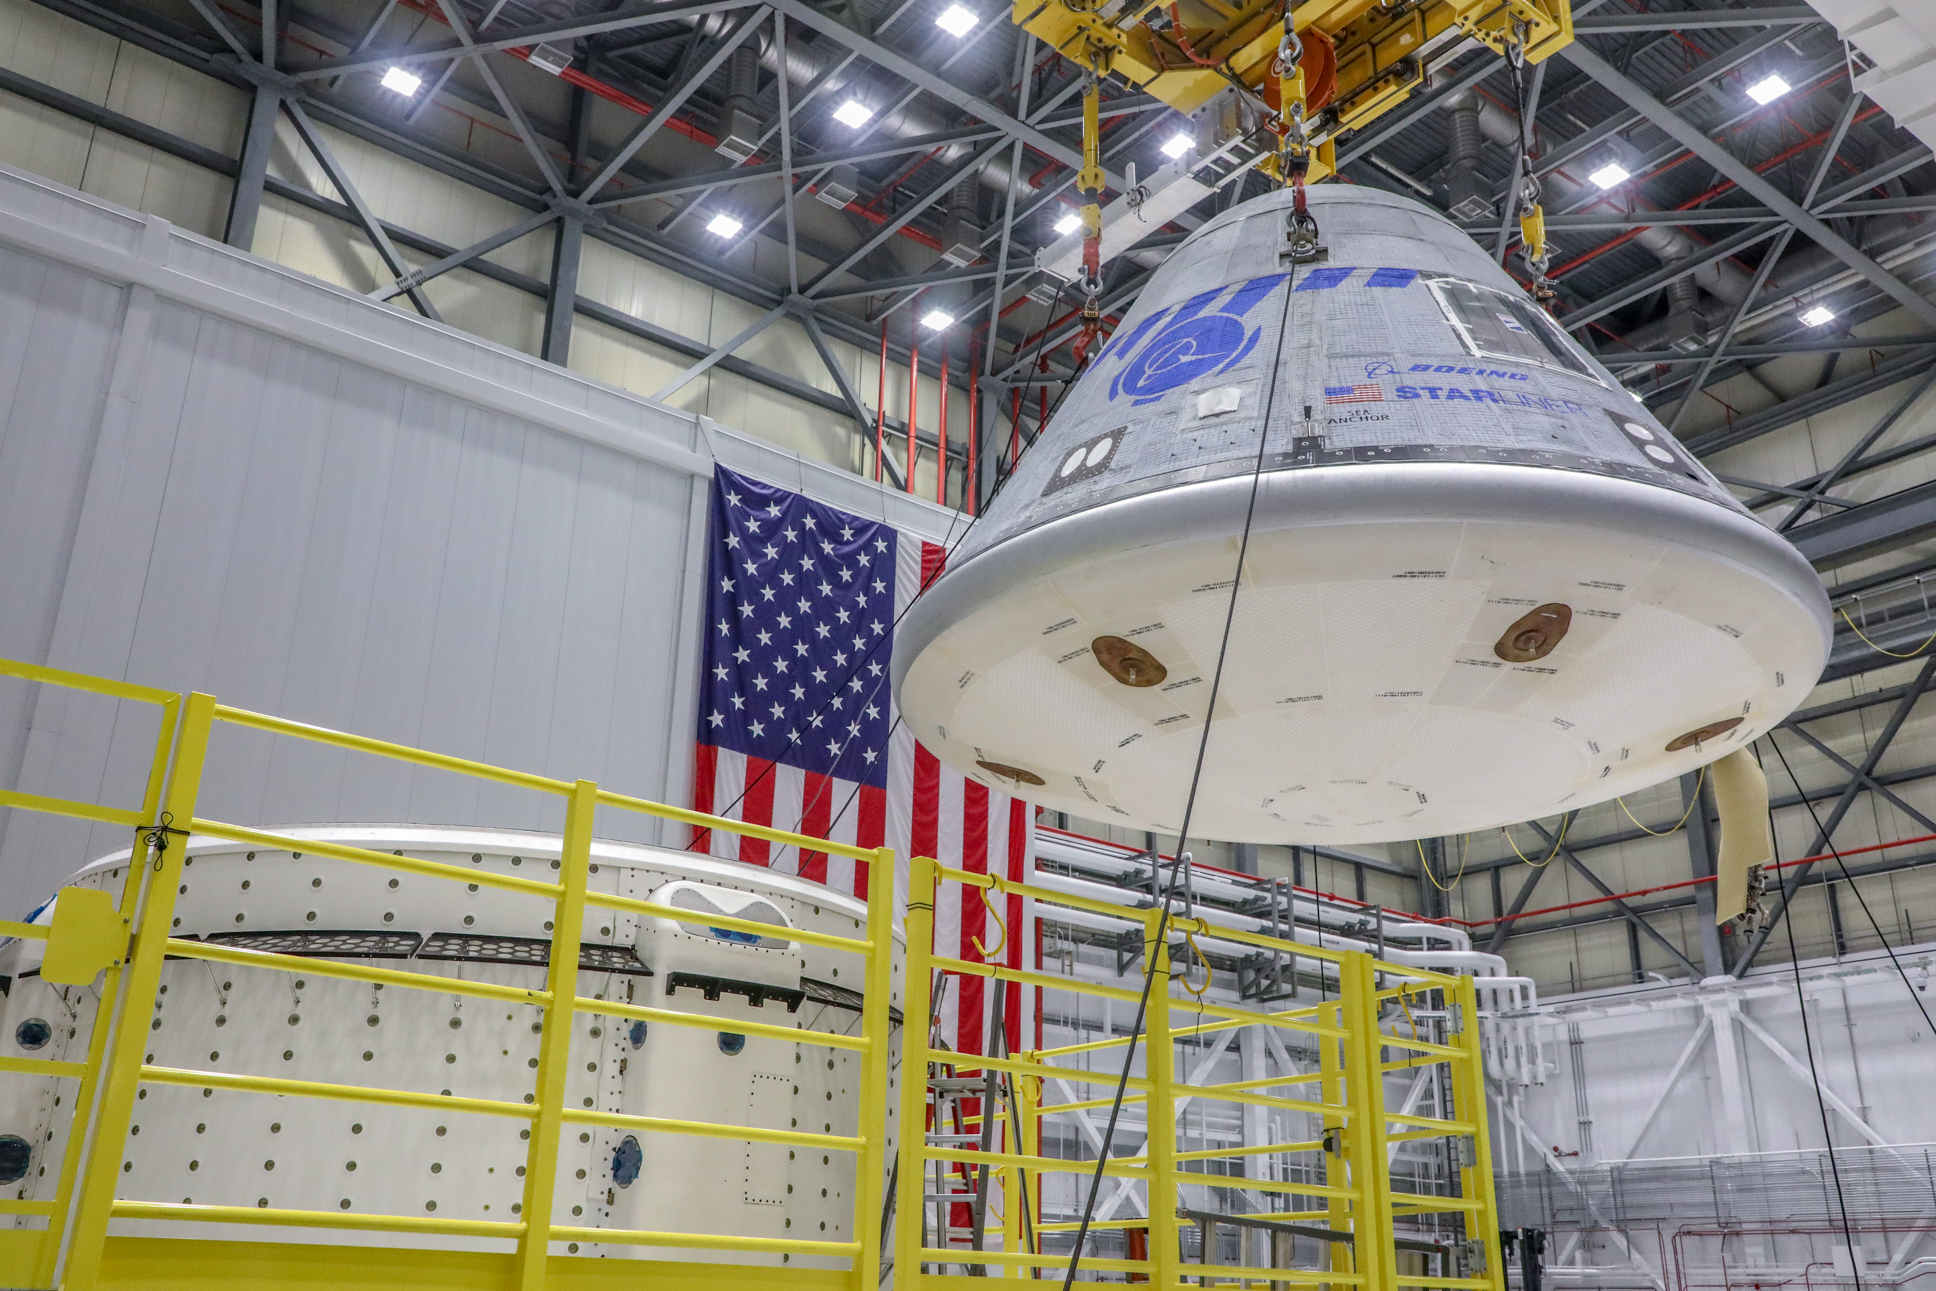 A new service module was mated to a Boeing CST-100 Starliner crew module to form a complete spacecraft on March 12, 2022, in Boeing’s Commercial Crew and Cargo Processing Facility at NASA’s Kennedy Space Center in Florida.